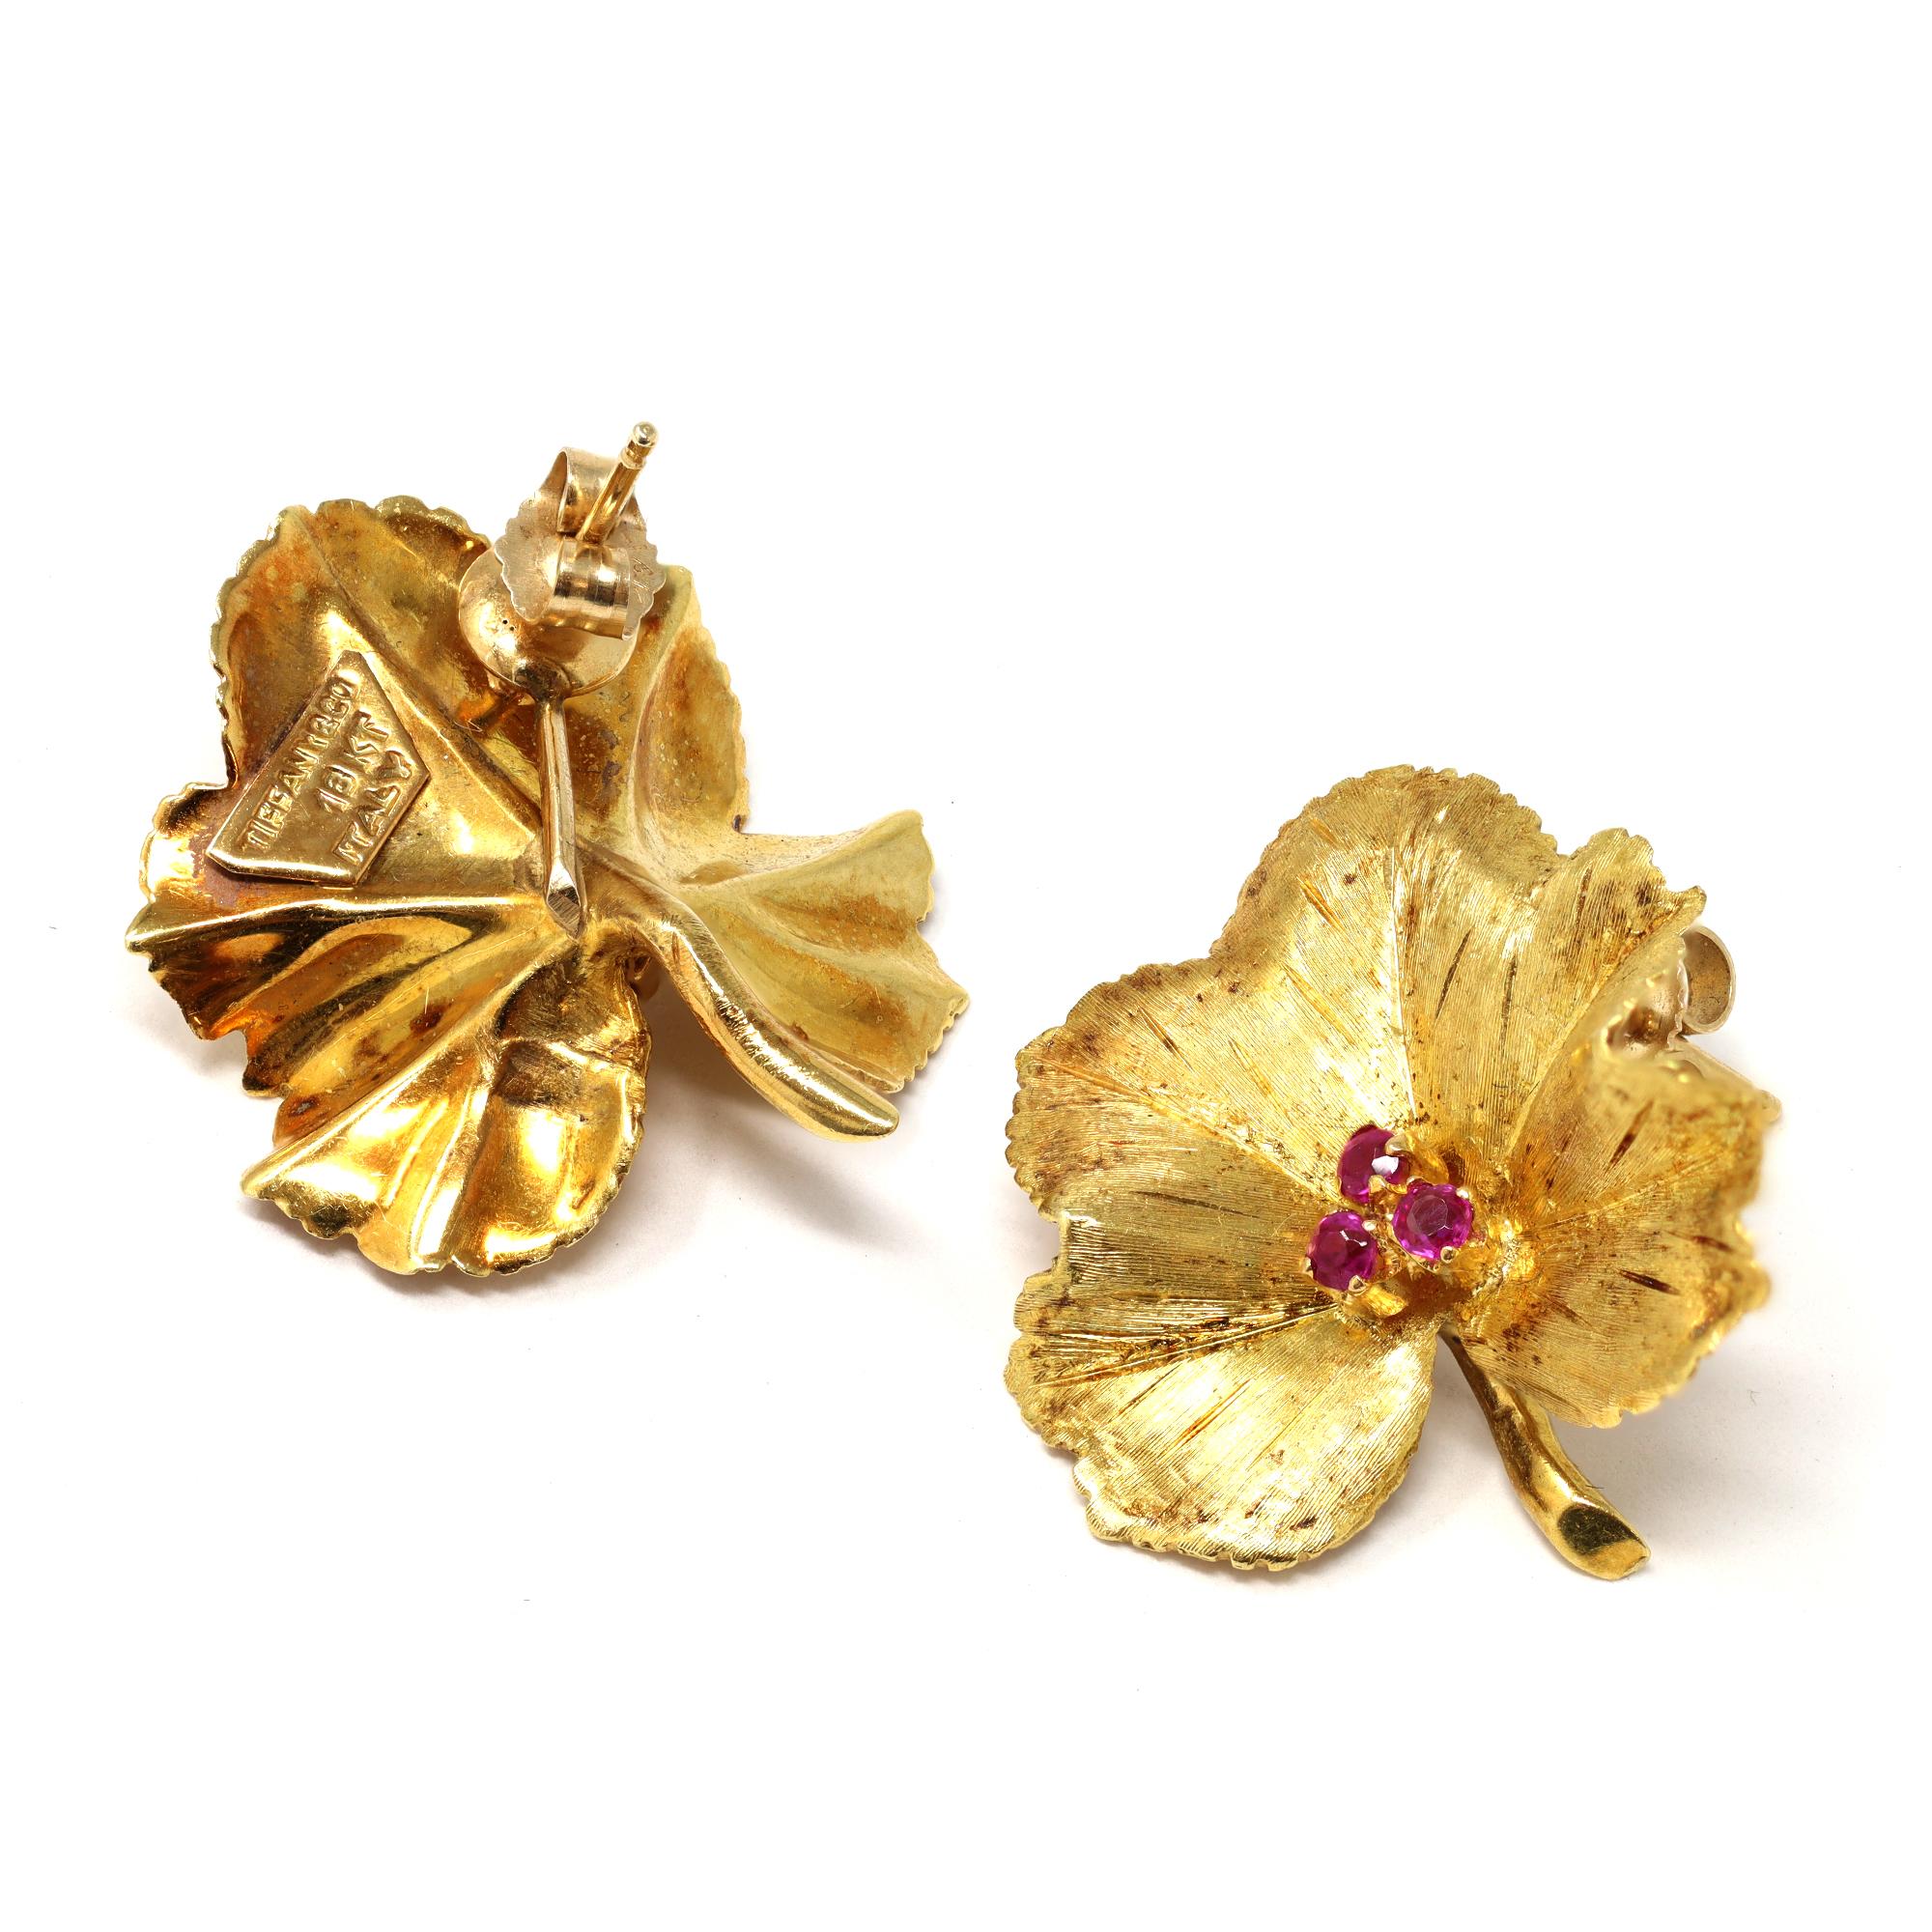 A lovely vintage set of Brooch and earrings signed by Tiffany & Co featuring a leaf motif, each accented with a cluster of Rubies in its center.
The suite is created in 18-karat yellow gold with calibrated natural round rubies presenting a lively